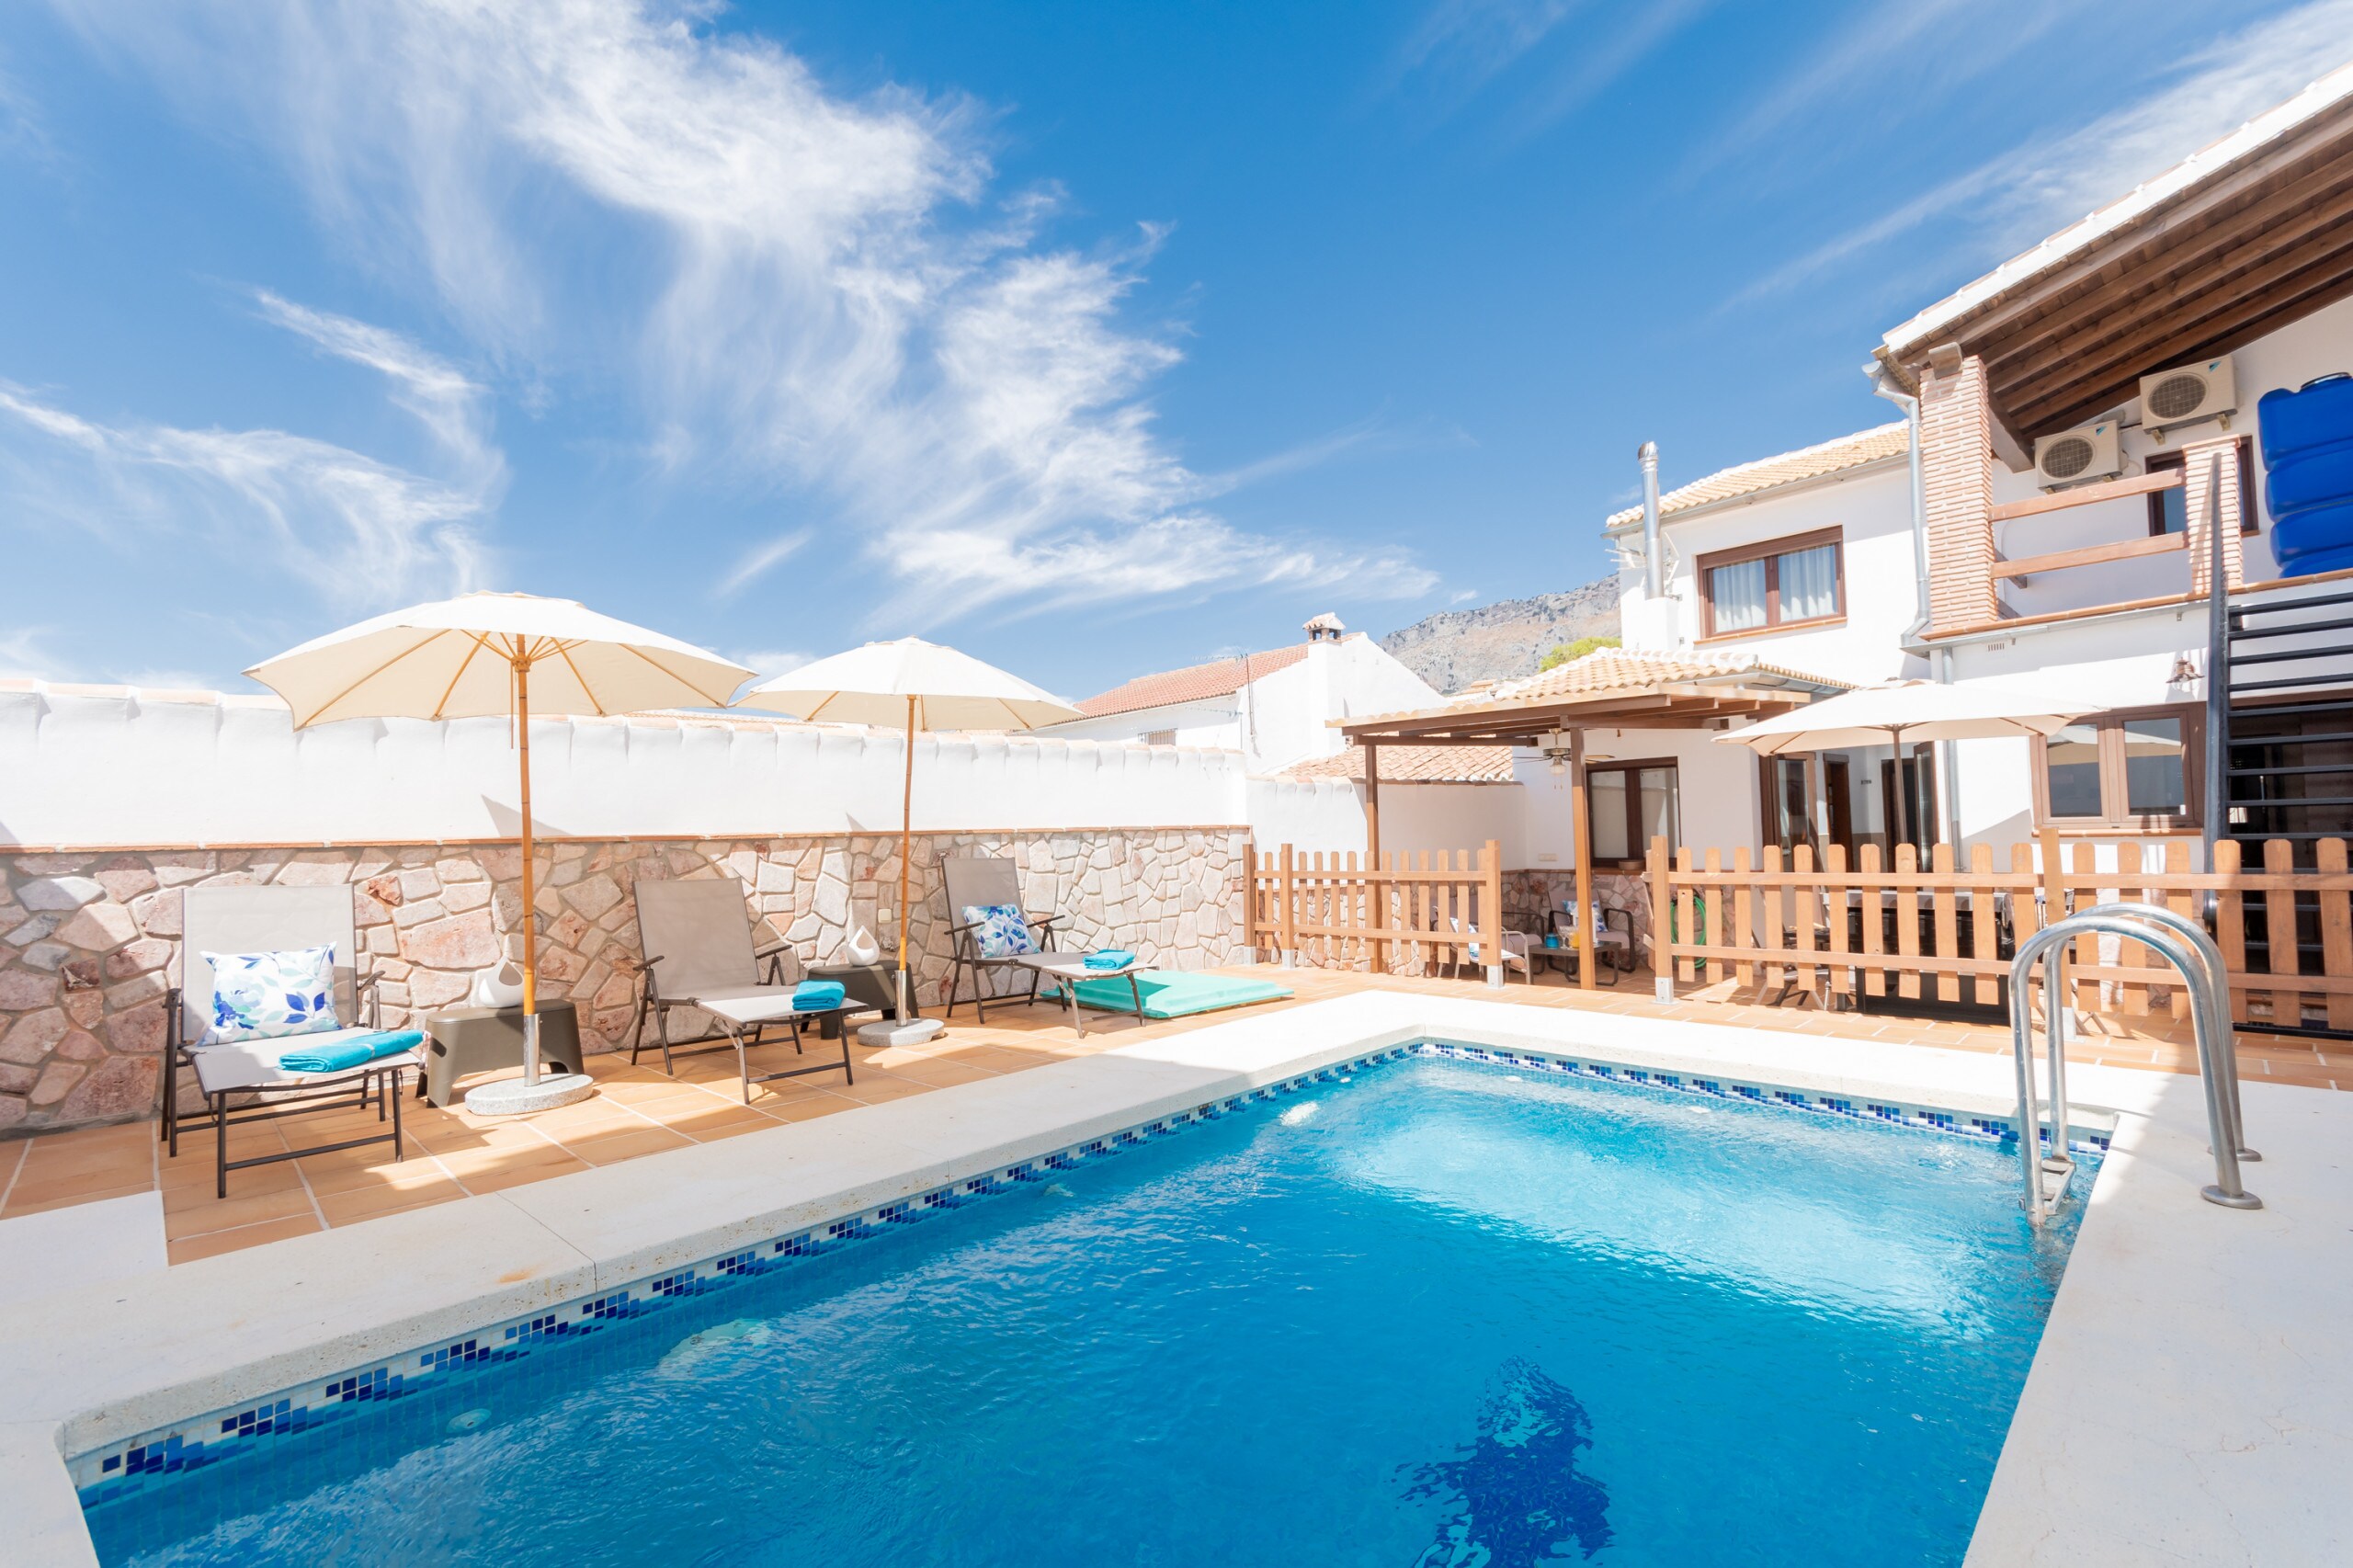 Enjoy the pool of this house in El Torcal